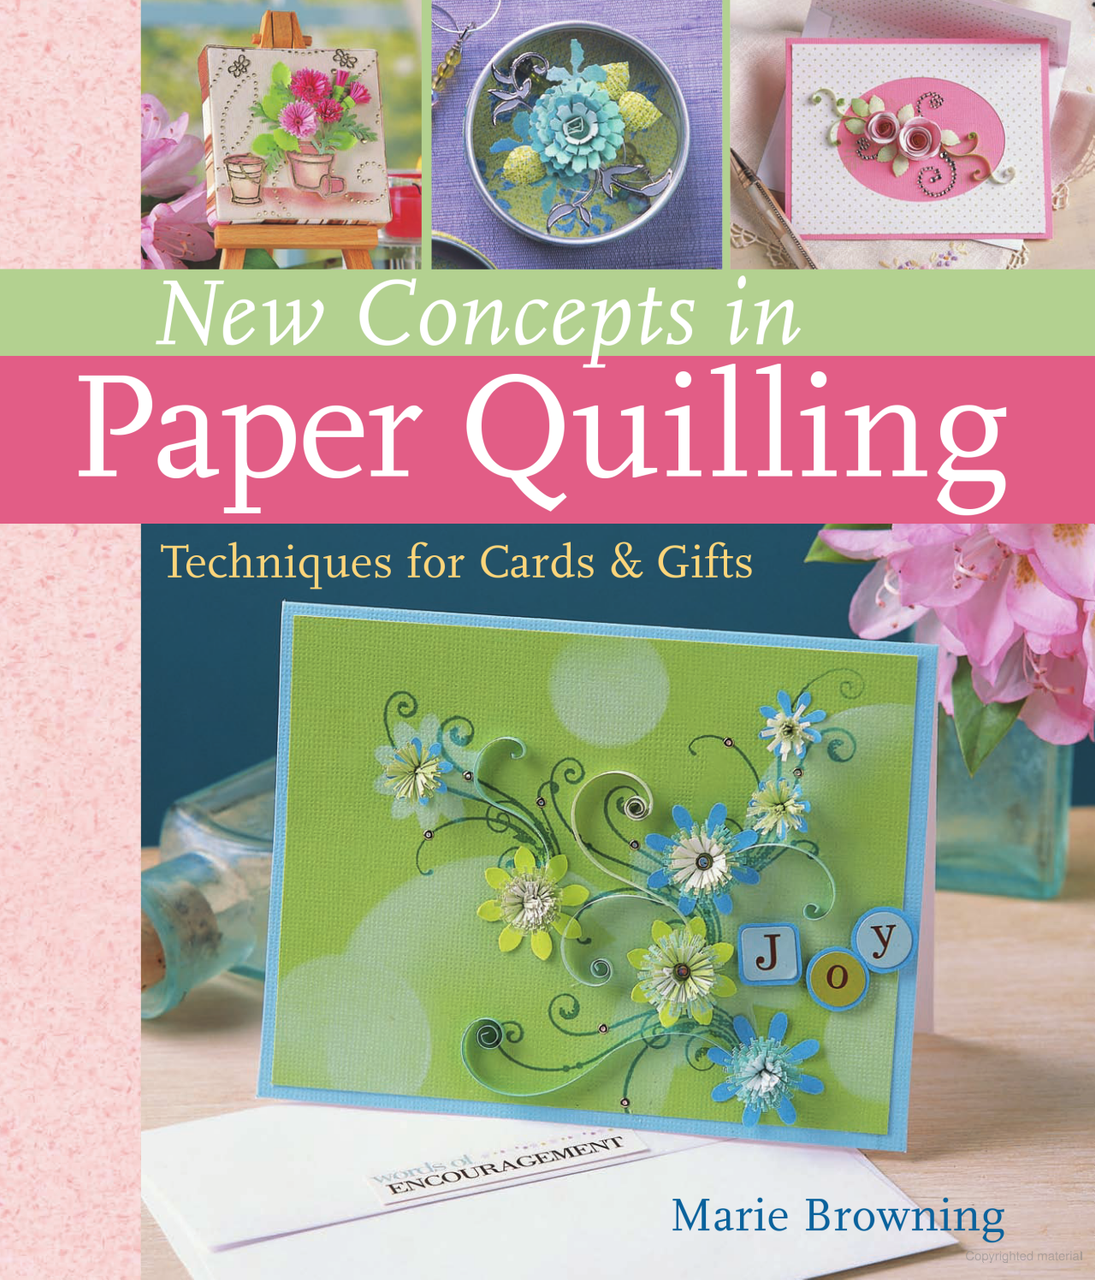 The Book of Paper Quilling: Techniques & Projects for Paper Filigree